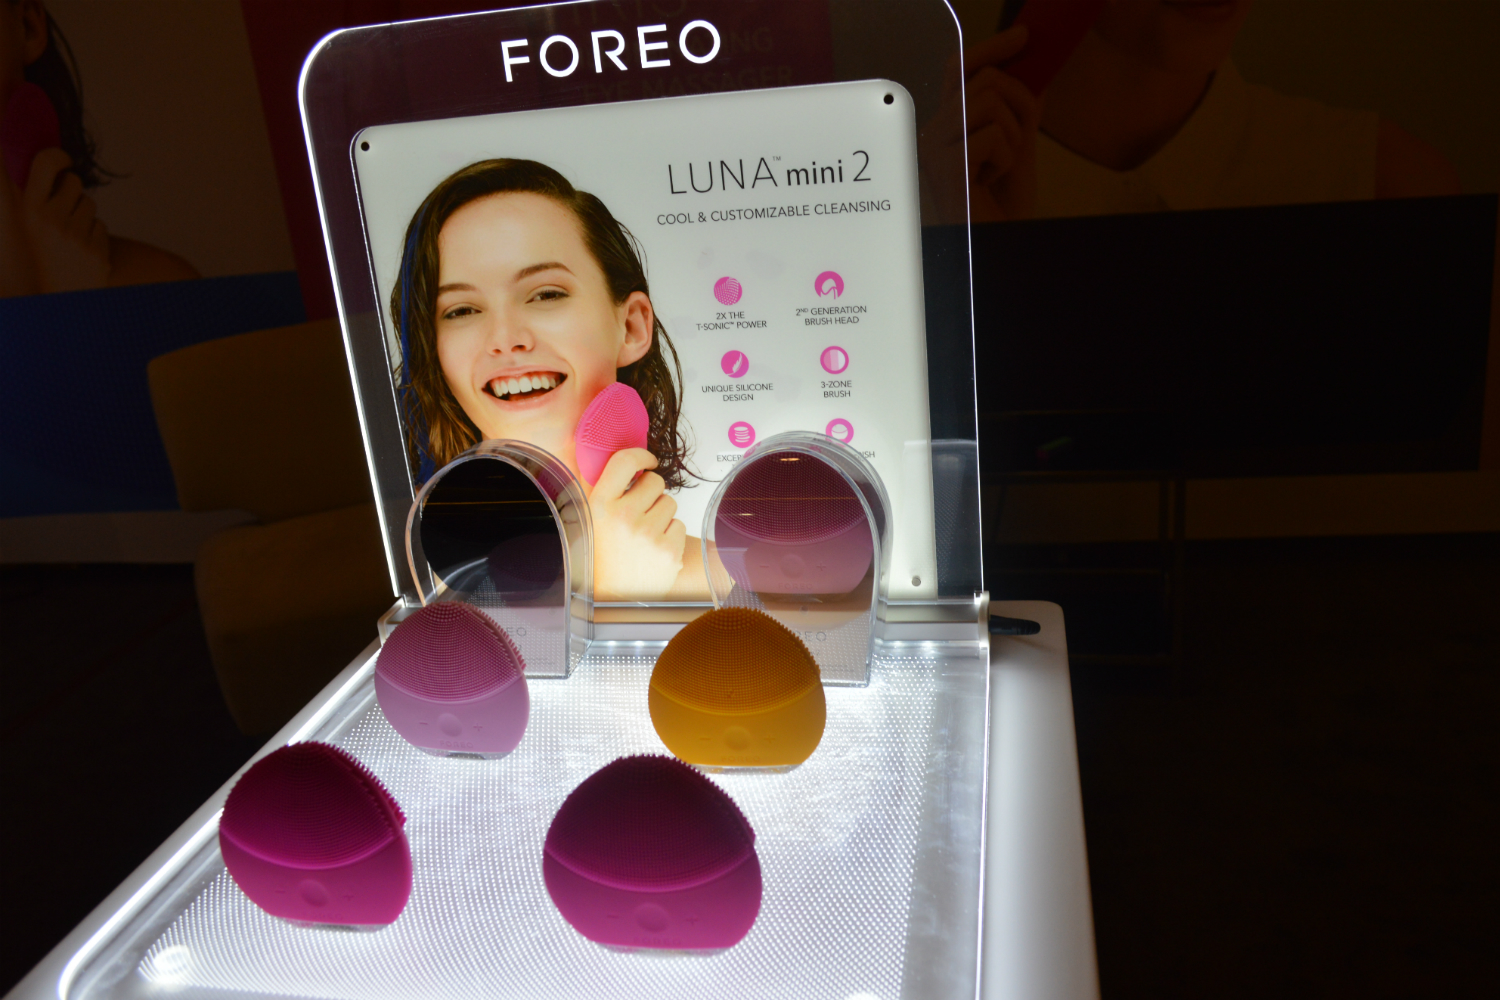 beauty tech gadgets from ces 2016 foreo